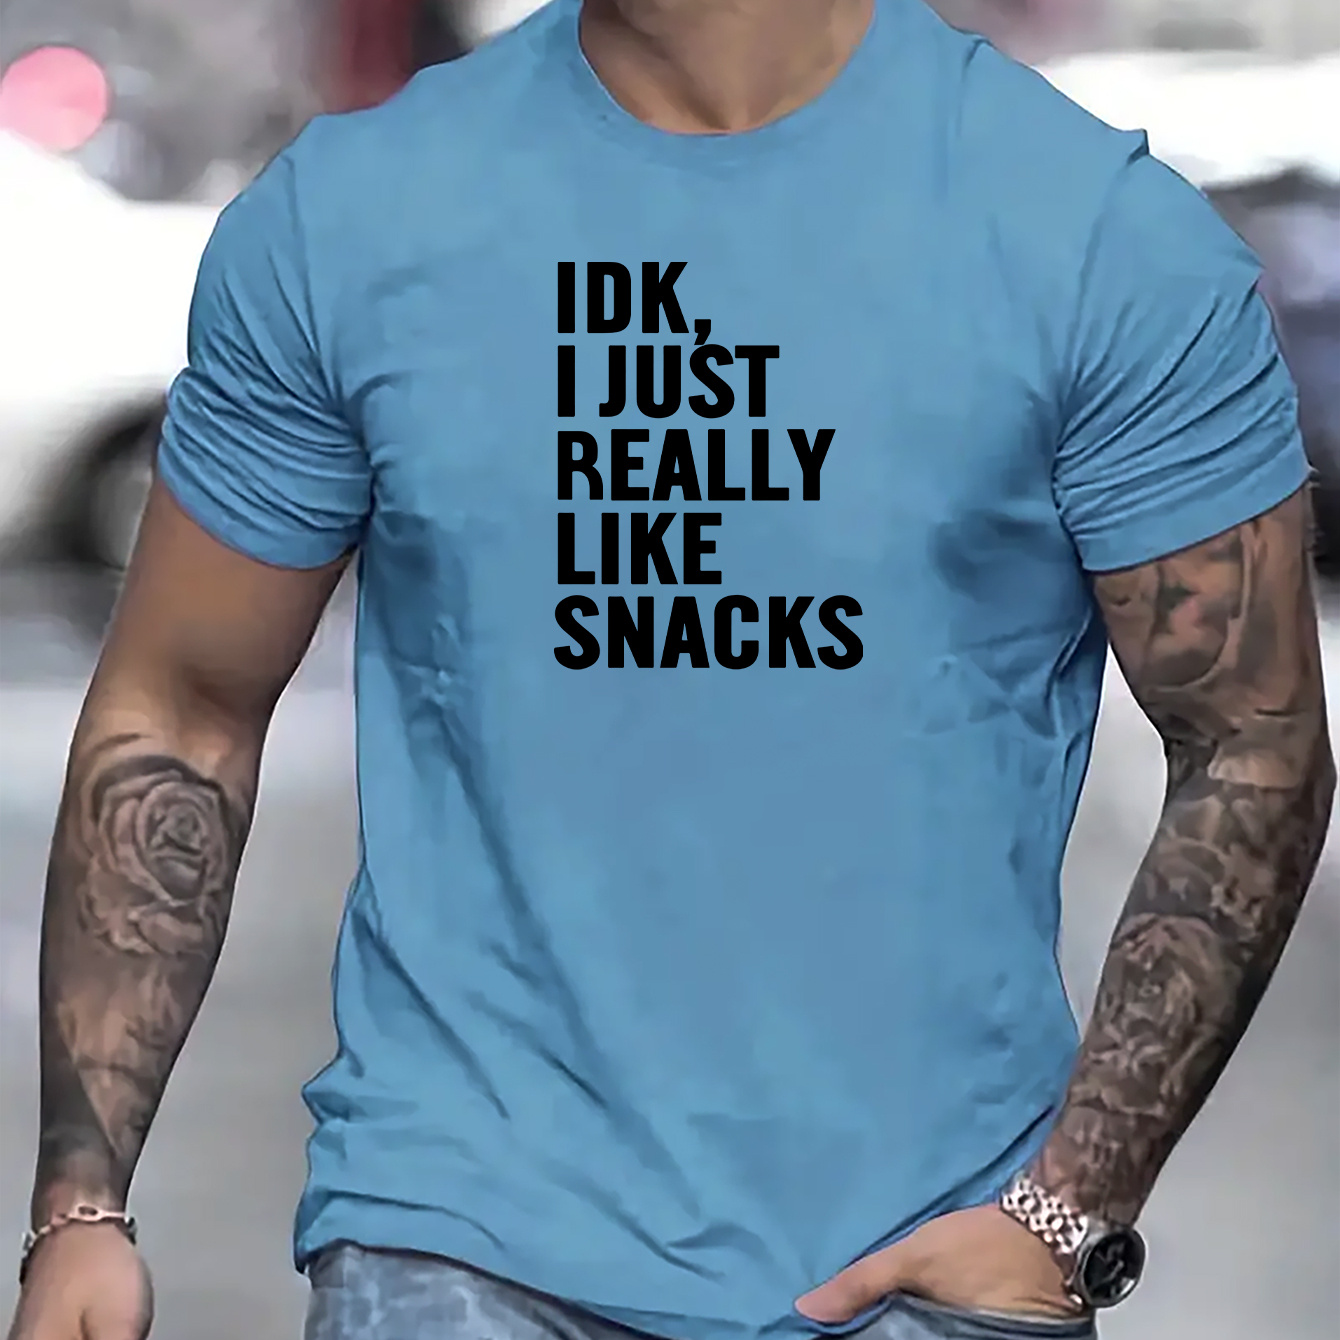 

Idk, I Just Really Like Snacks Print, Men's Novel Graphic Design T-shirt, Casual Comfy Tees For Summer, Men's Clothing Tops For Daily Activities